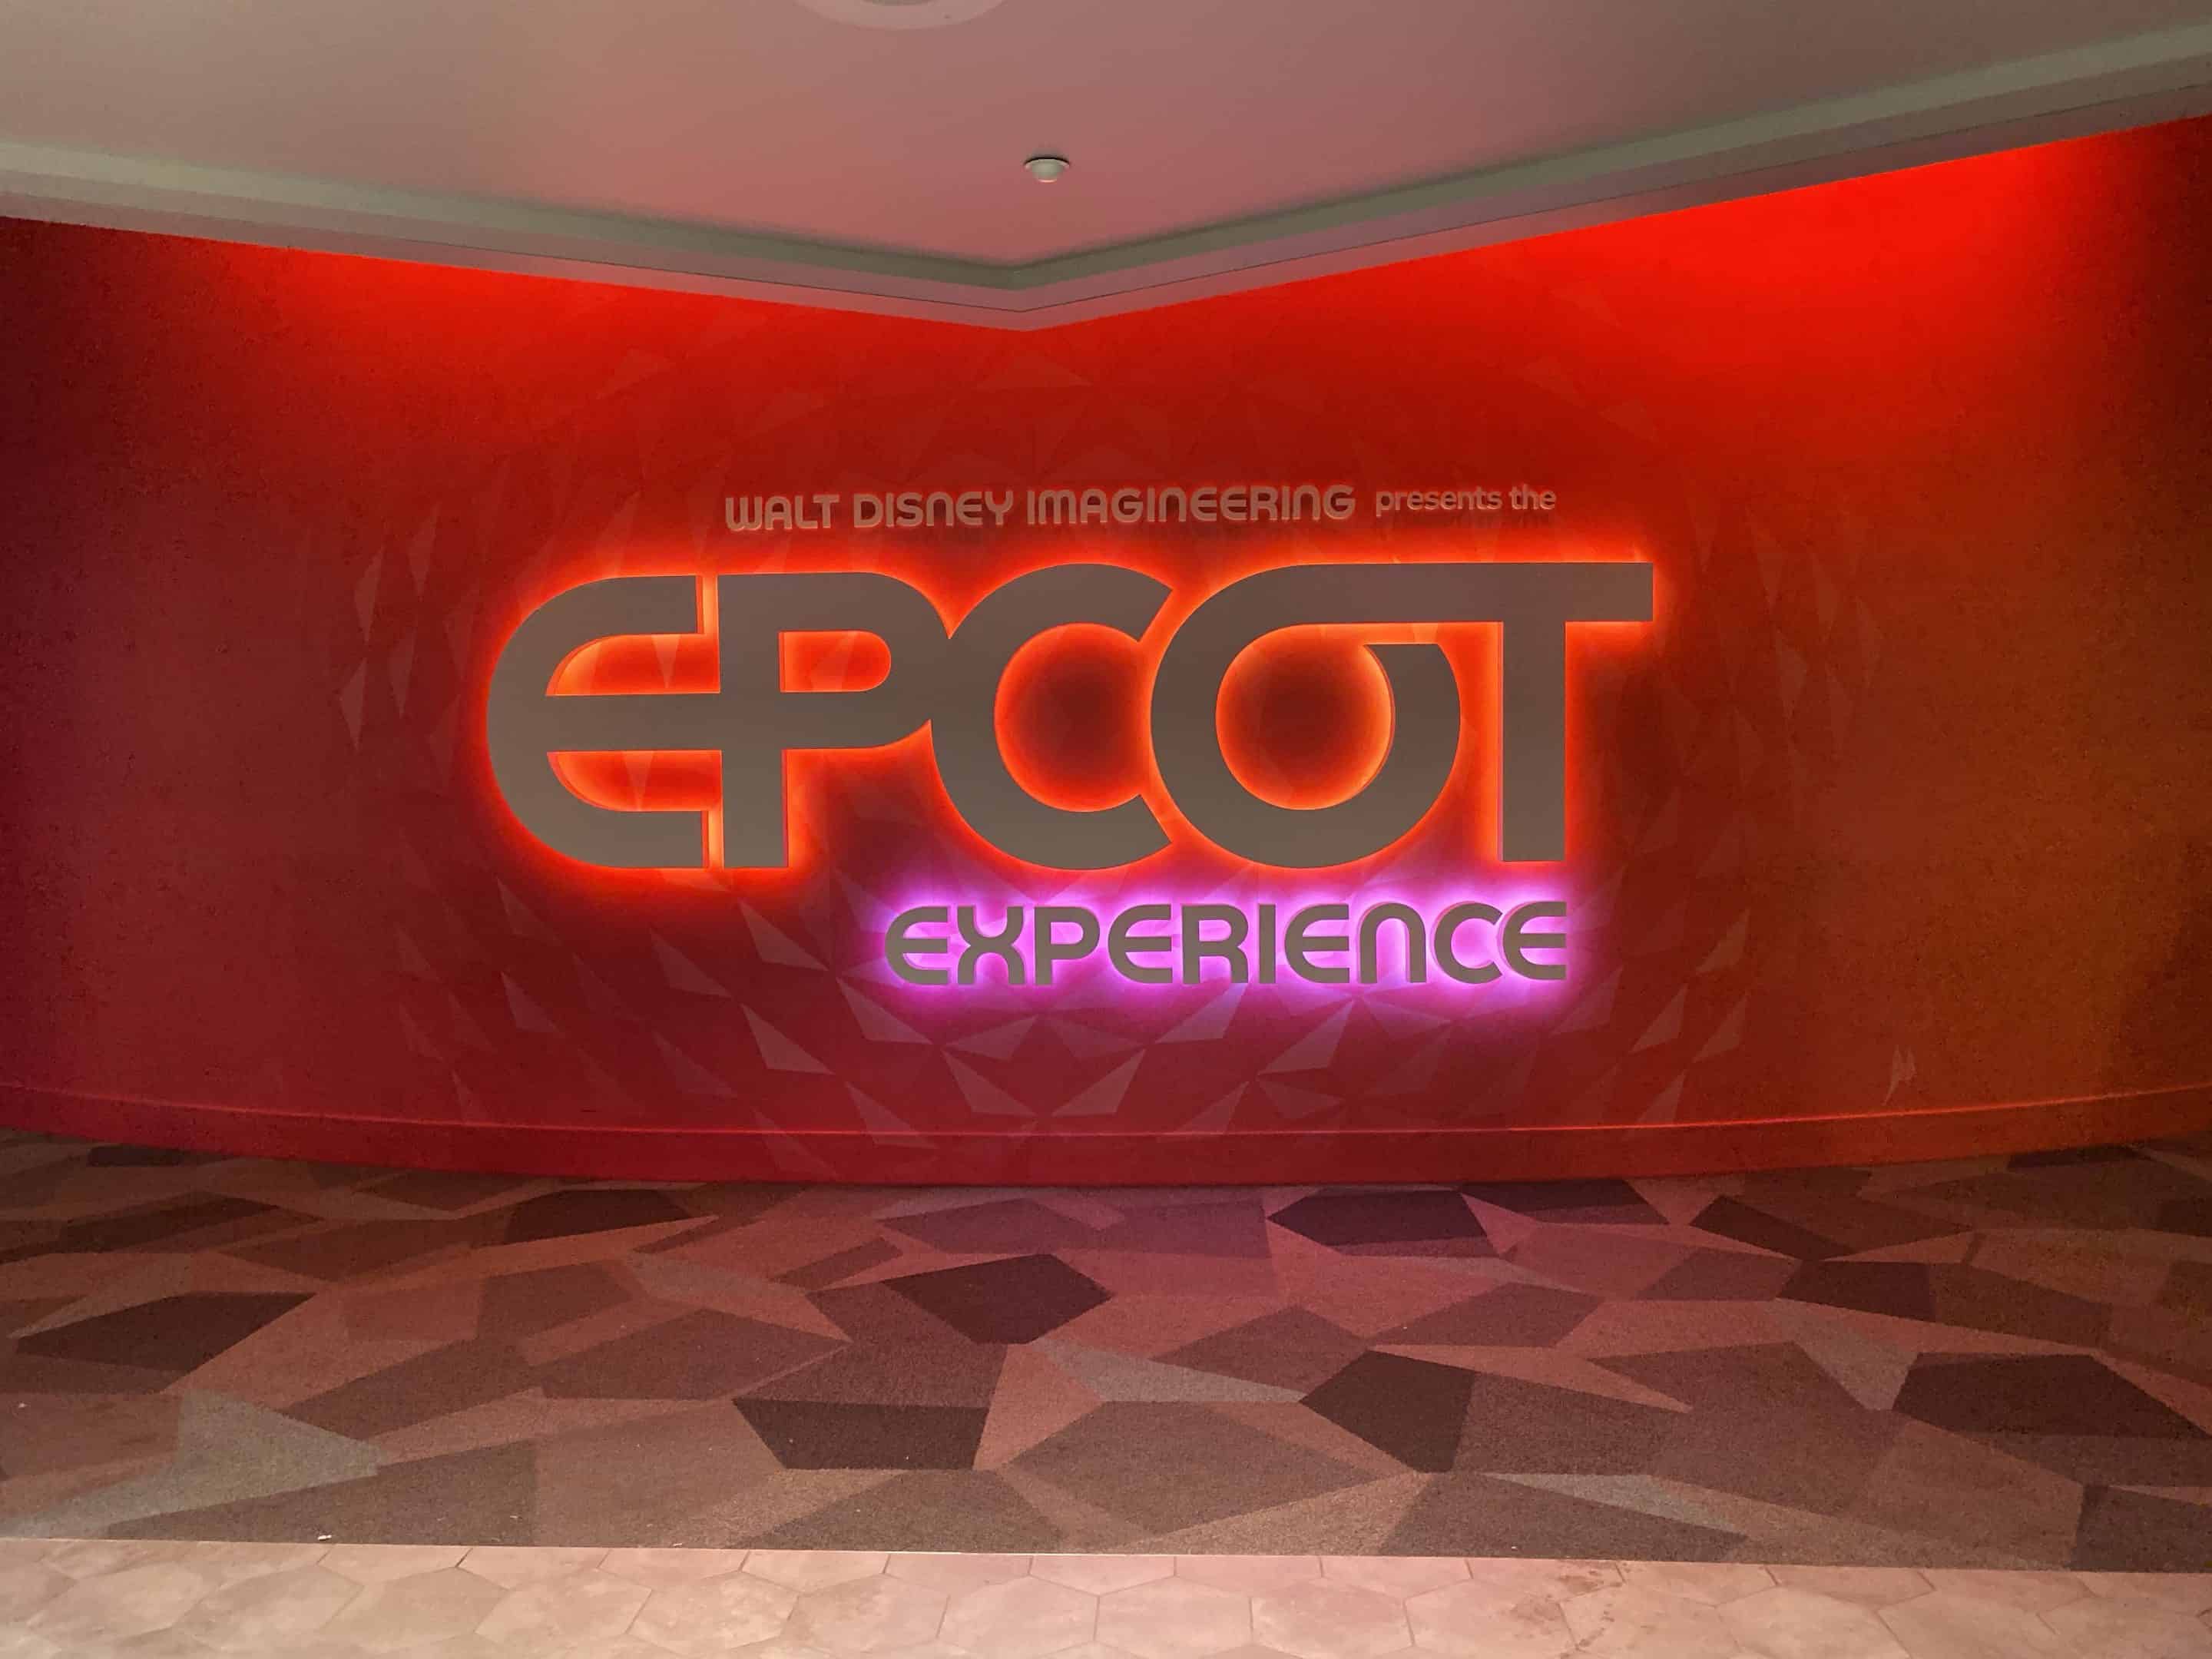 The EPCOT Experience